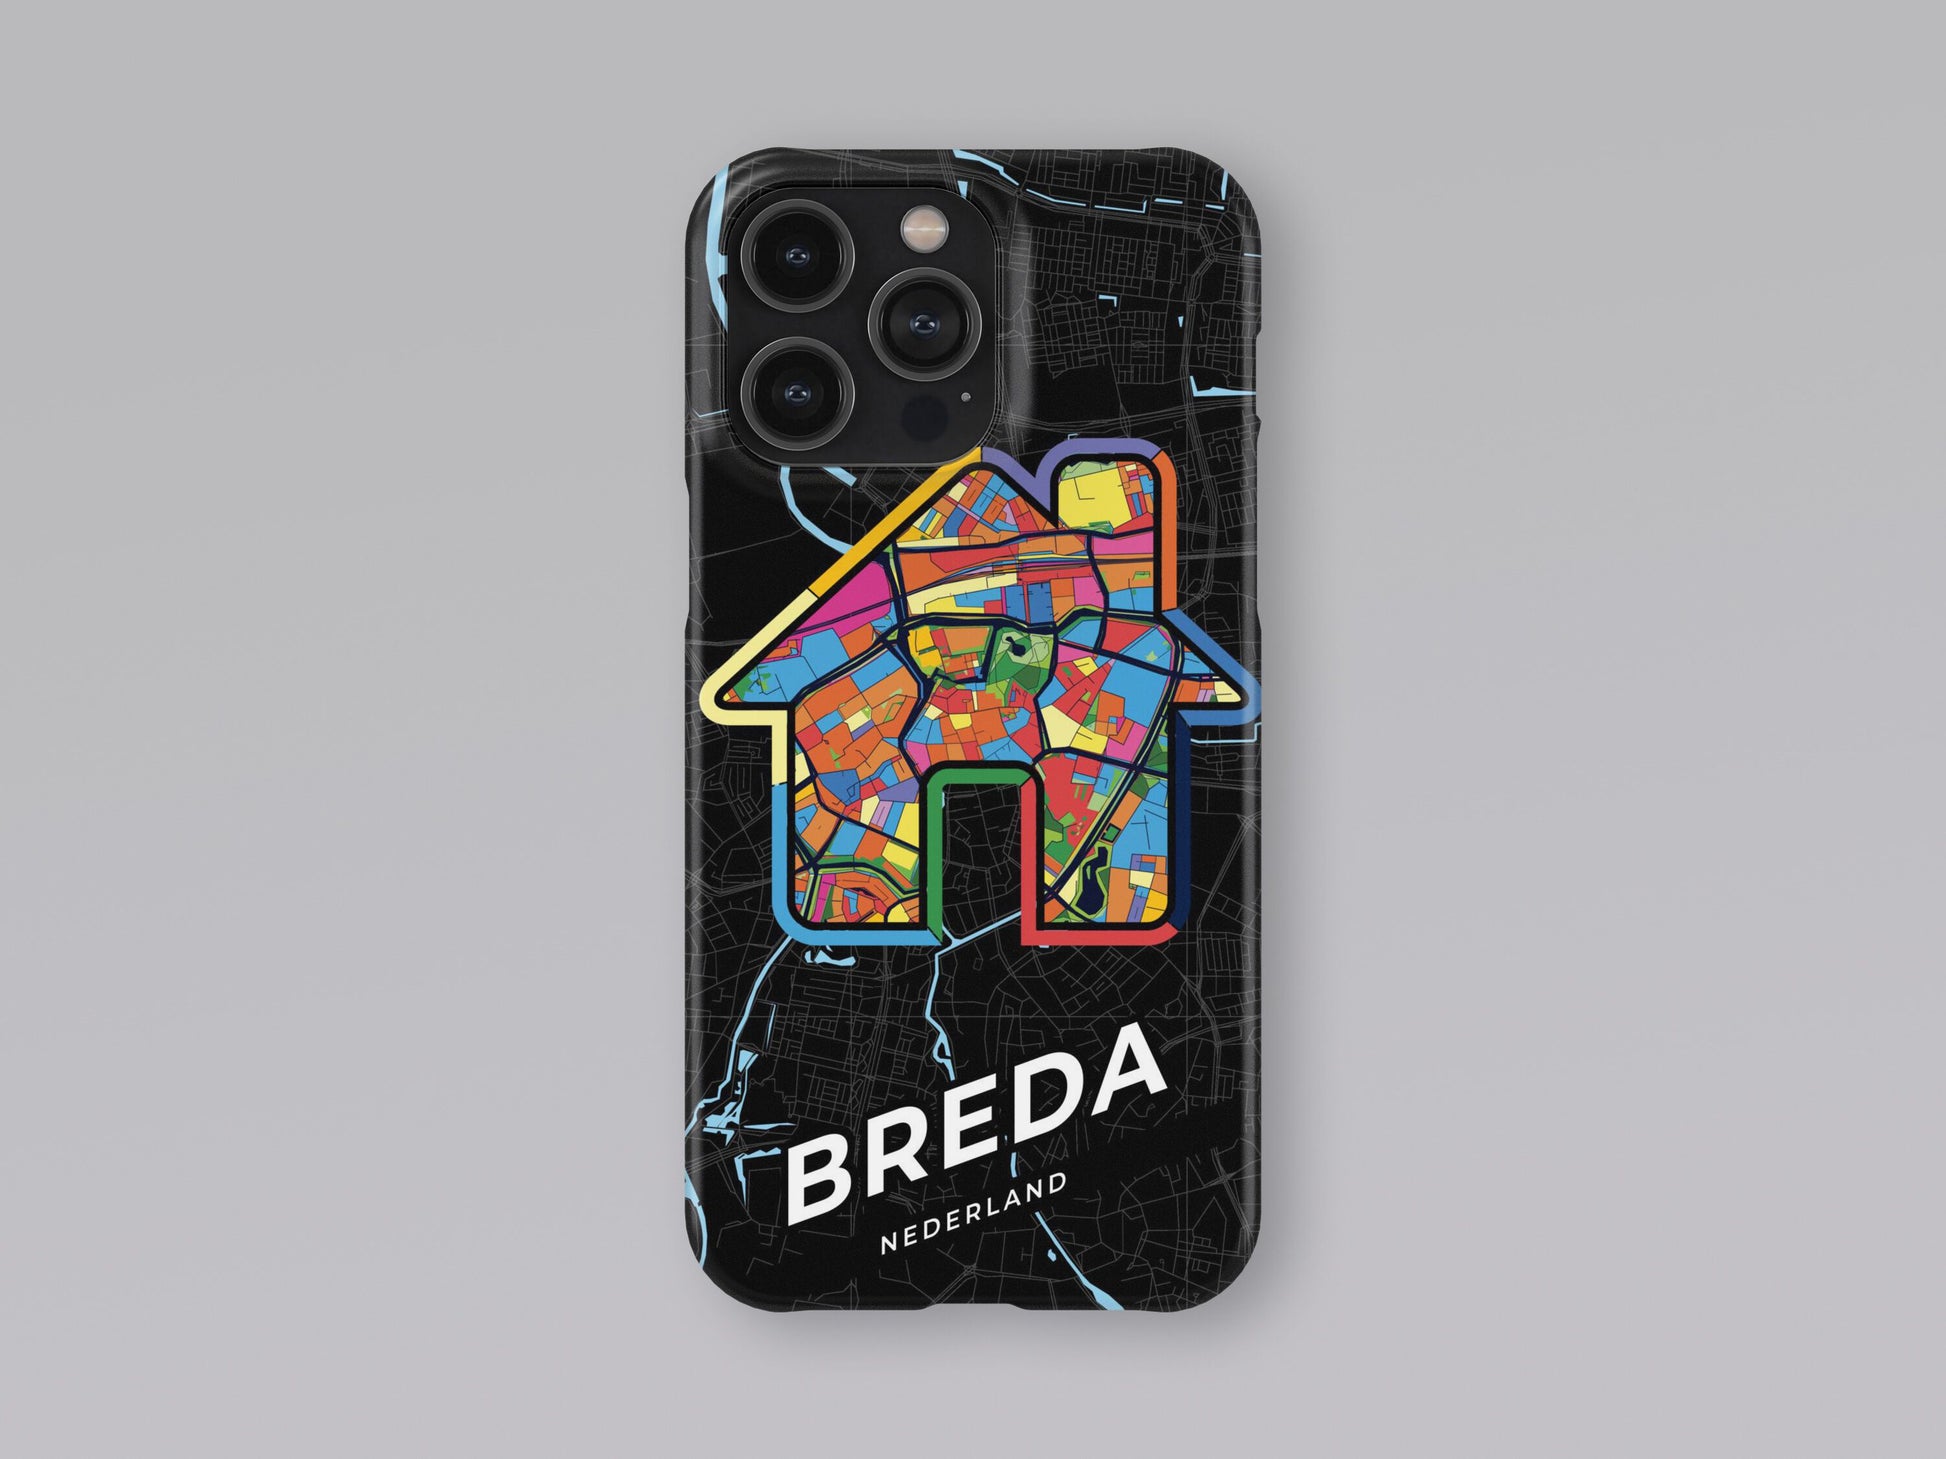 Breda Netherlands slim phone case with colorful icon. Birthday, wedding or housewarming gift. Couple match cases. 3